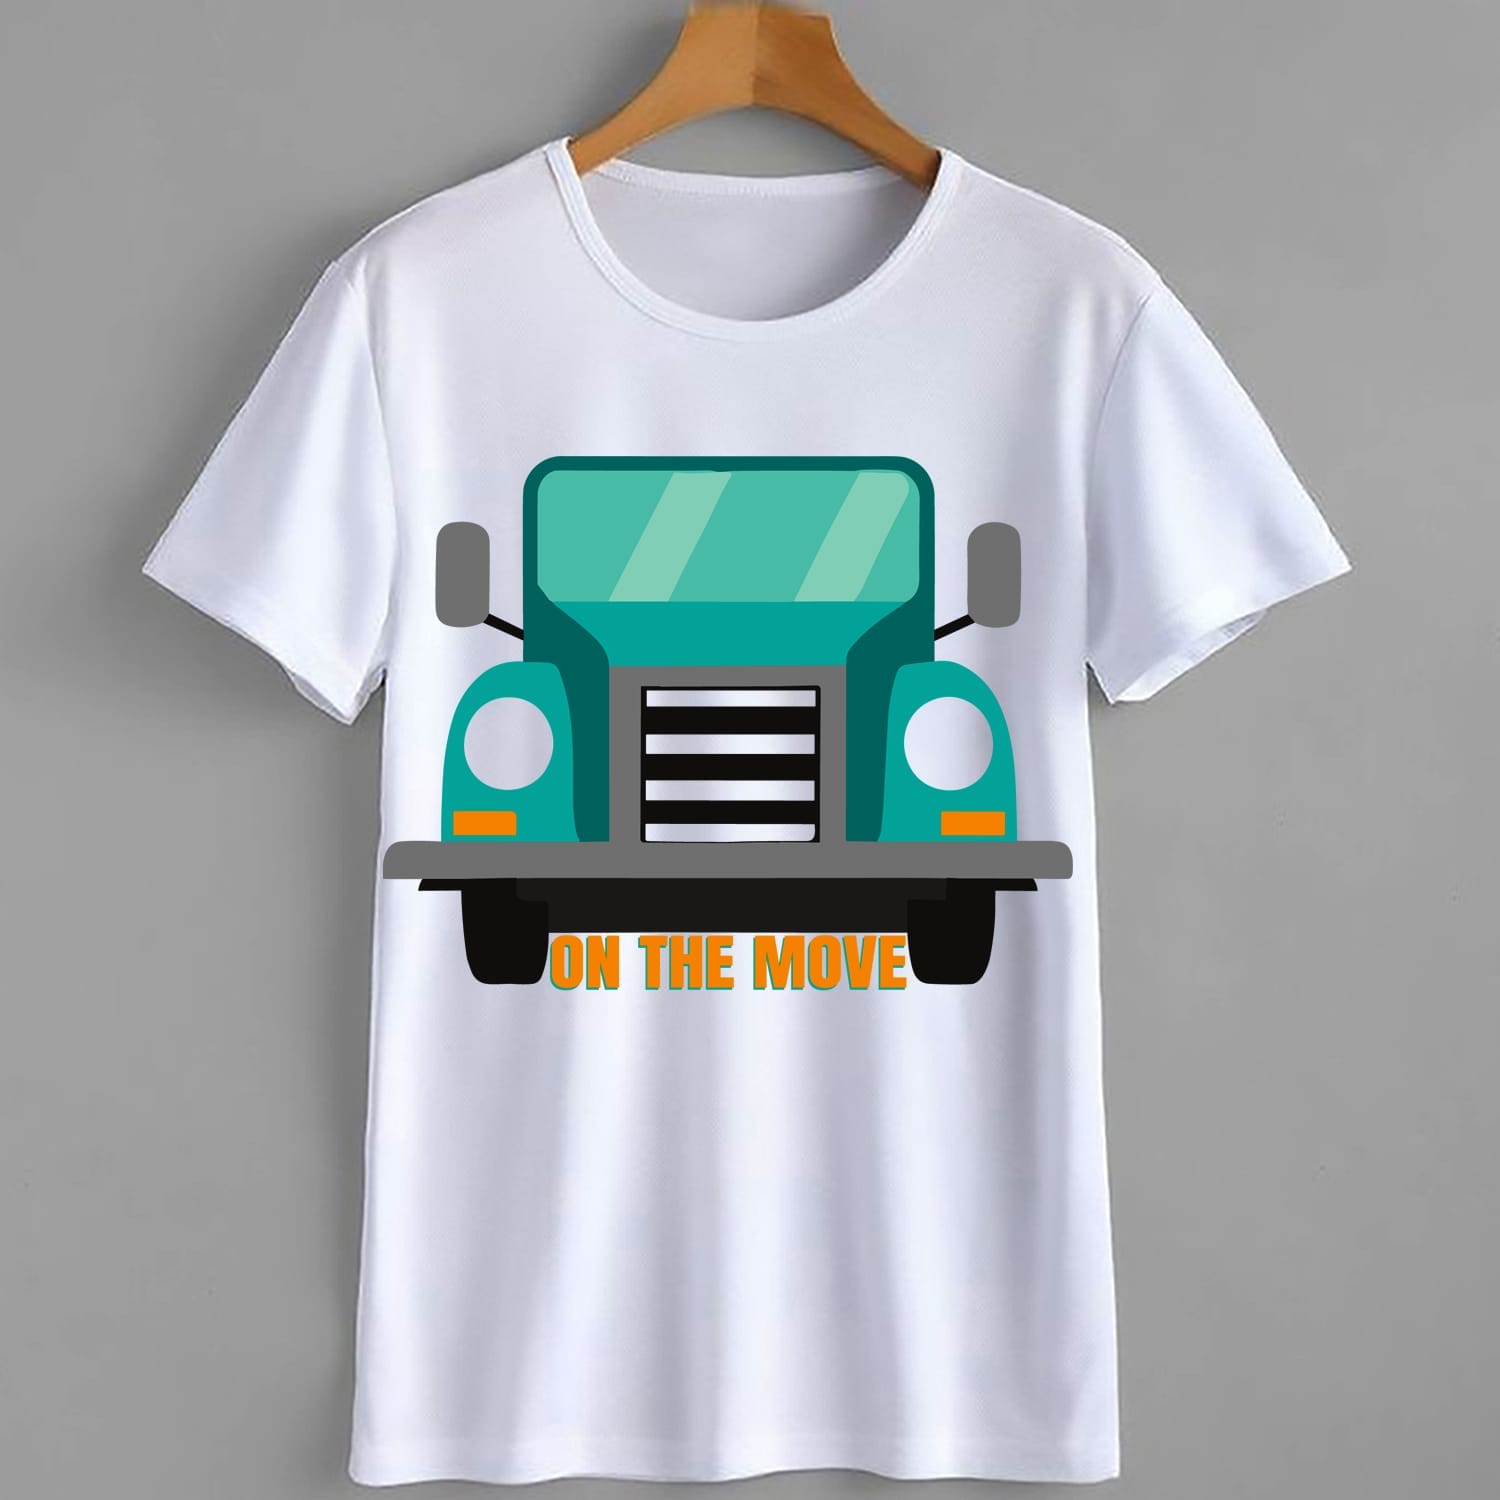 On The Move - Truck T-Shirt Design